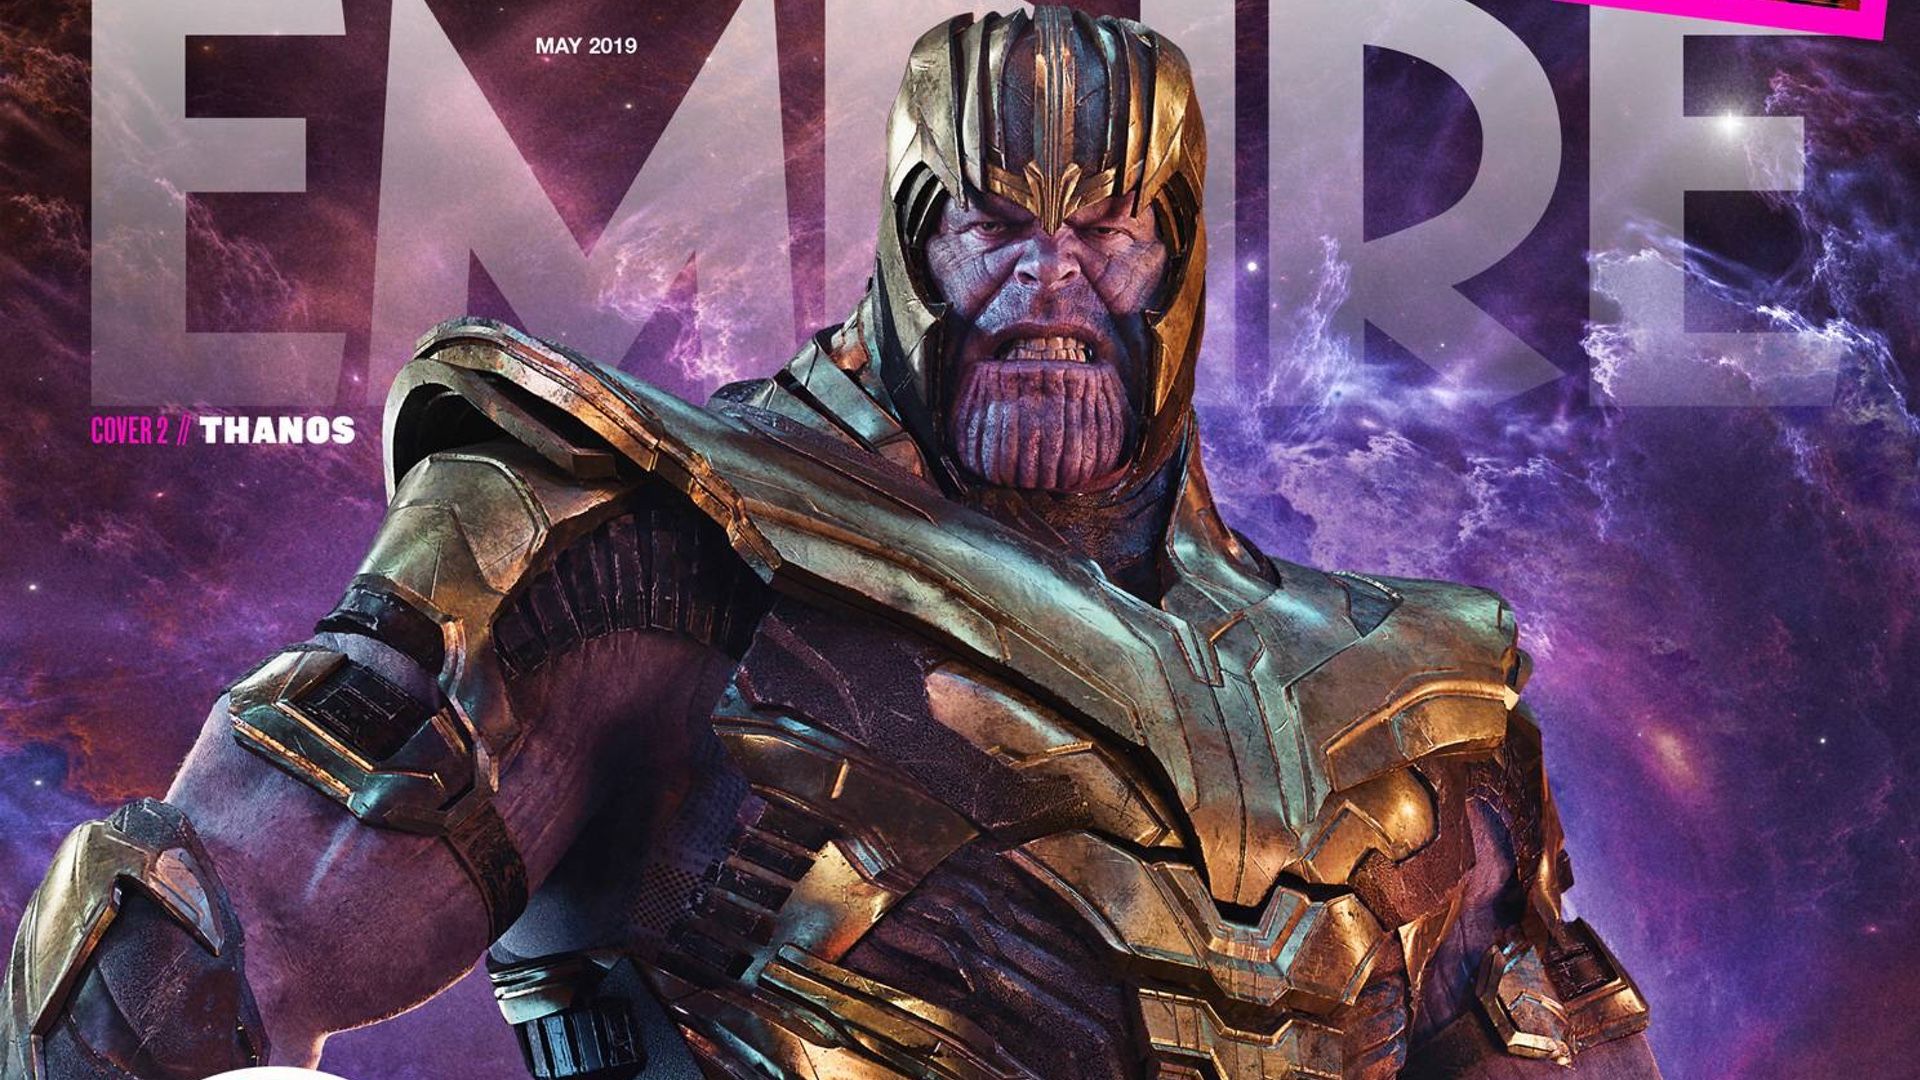 Free download Thanos Graces The Cover of Empire in Full Armor